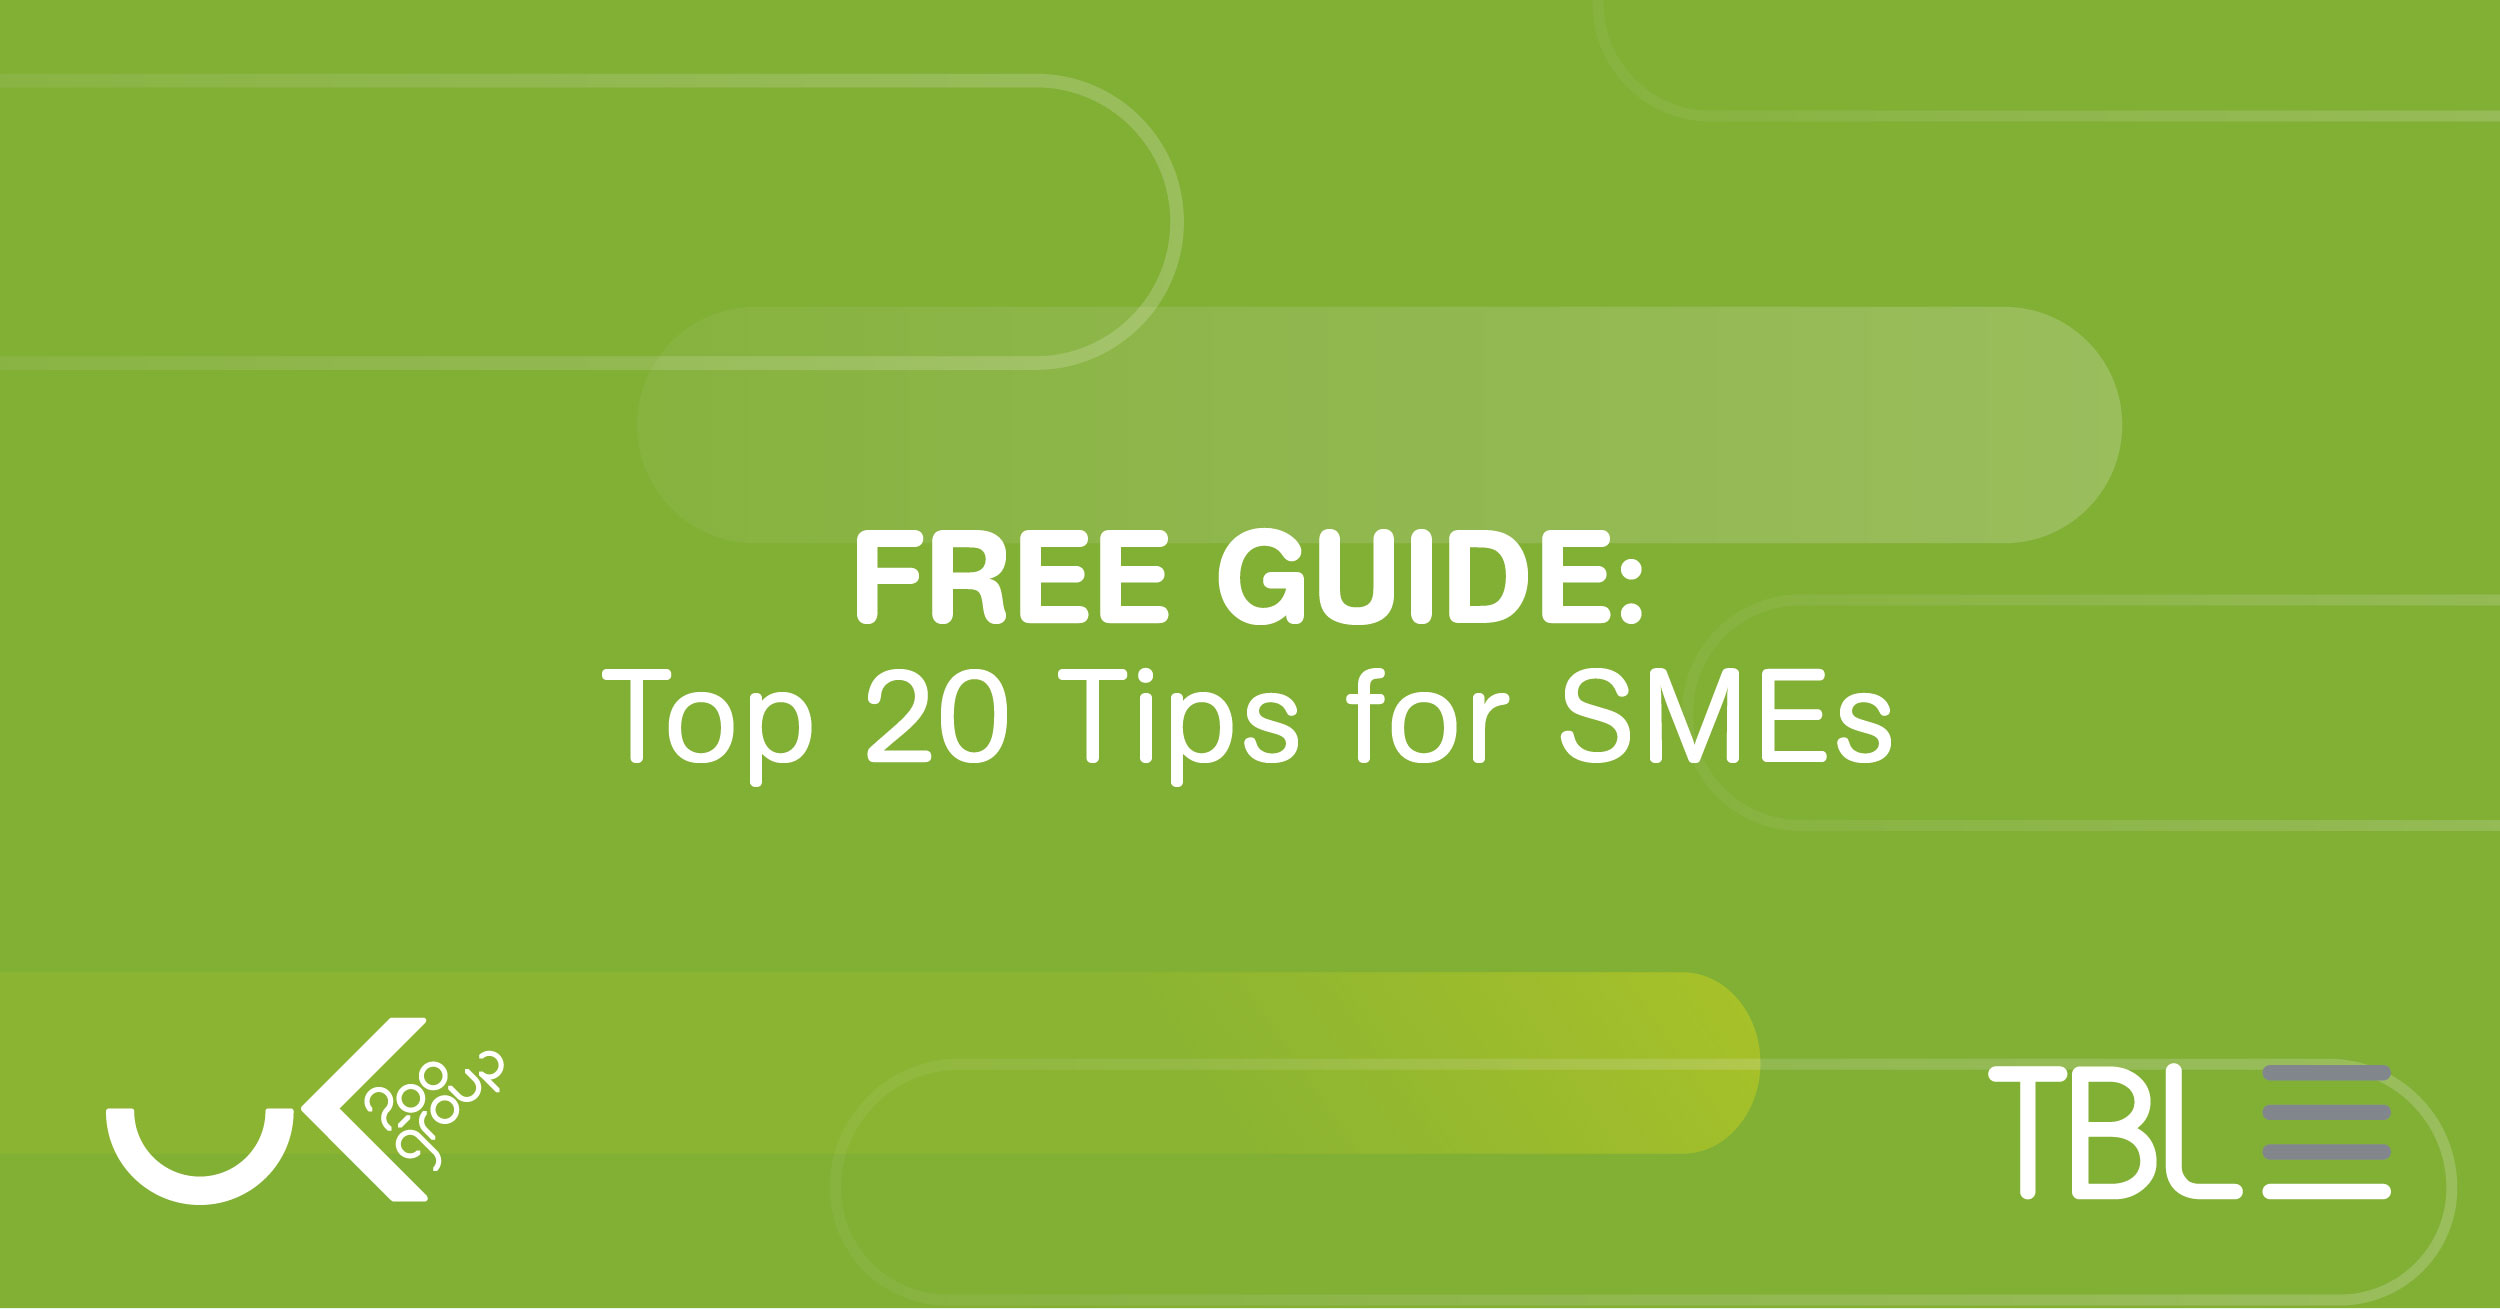 Top 20 Tips for SMES – free guide available from tbl